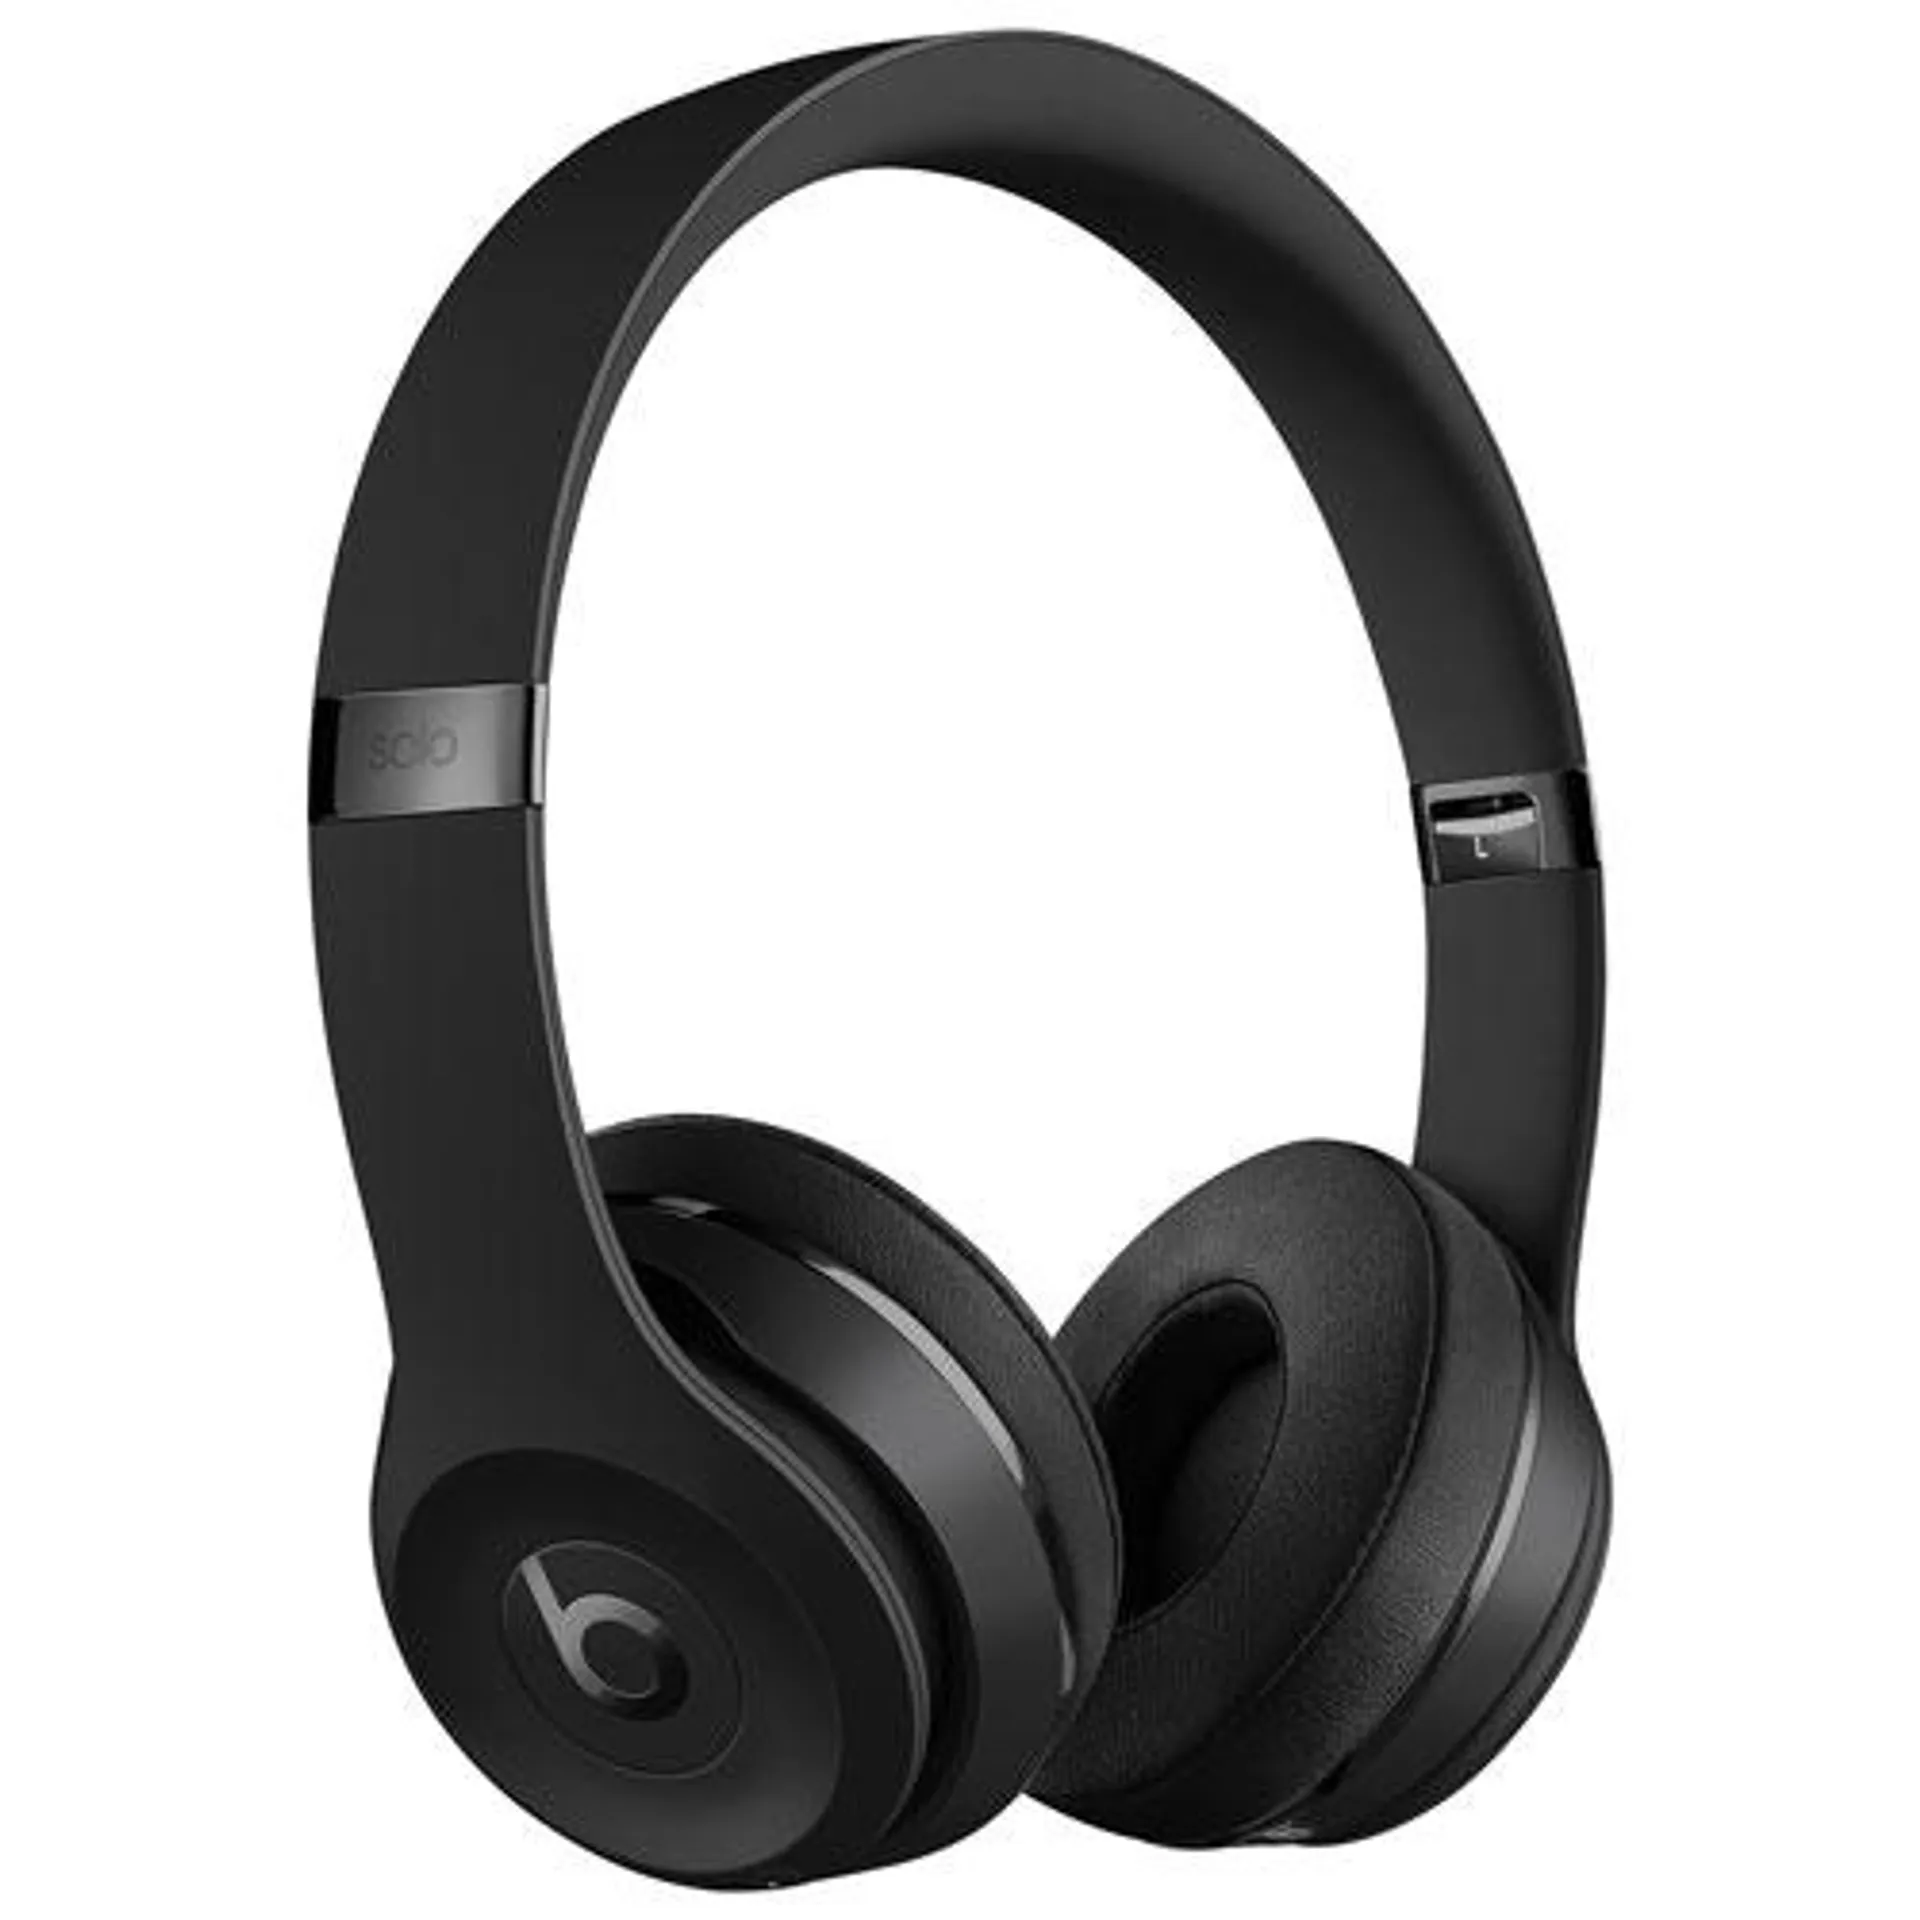 Beats by Dr. Dre Solo3 On-Ear Sound Isolating Bluetooth Headphones - Black